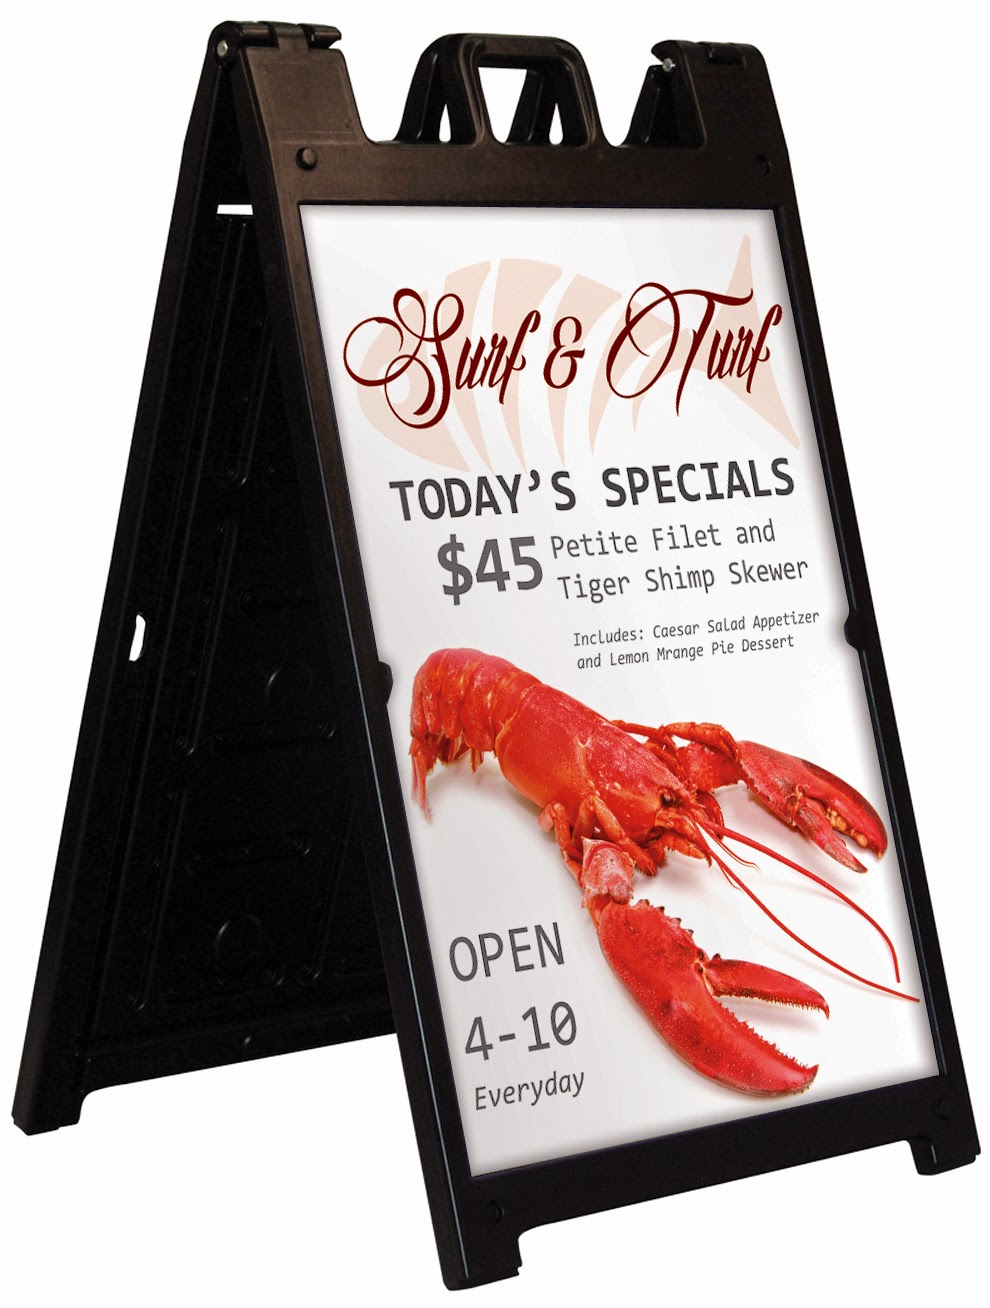 Signicade Deluxe A Frame with 36" x 24" Printed Signs | Banners.com